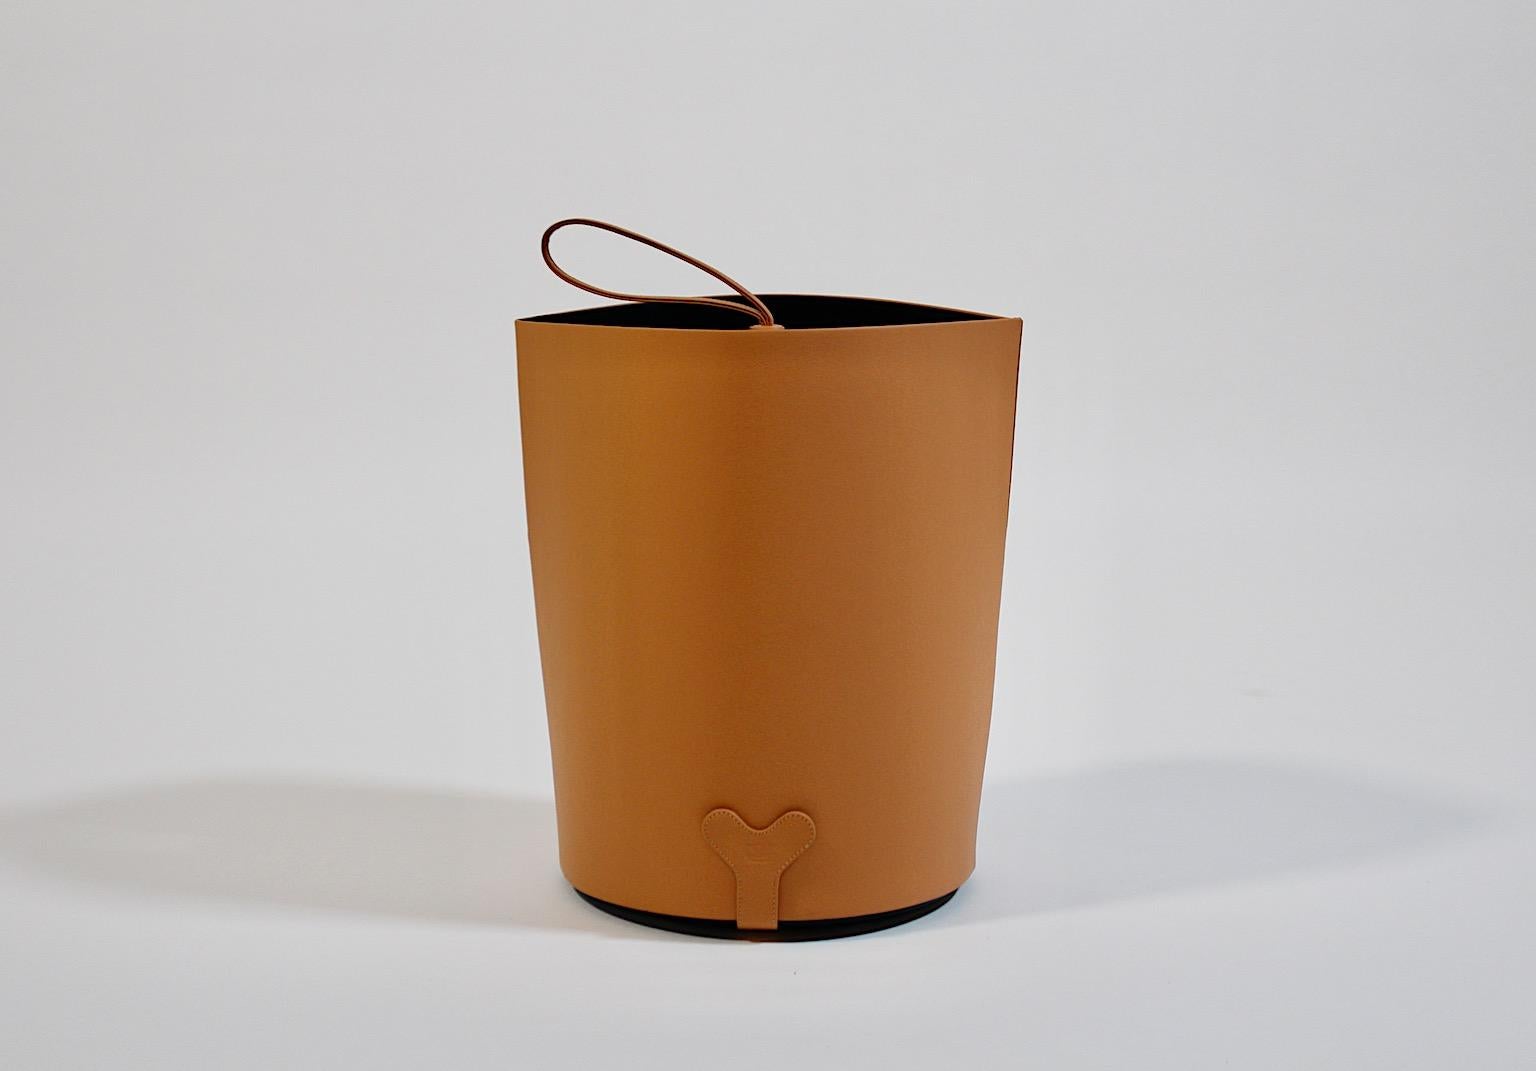 Modern vintage umbrella stand or cane holder from cognac brown real leather by Poltrona Frau circa 2000, Italy.
A beautiful vintage luxurious umbrella stand by Poltrona Frau from cognac brown high quality leather with plastic inlay.
This very